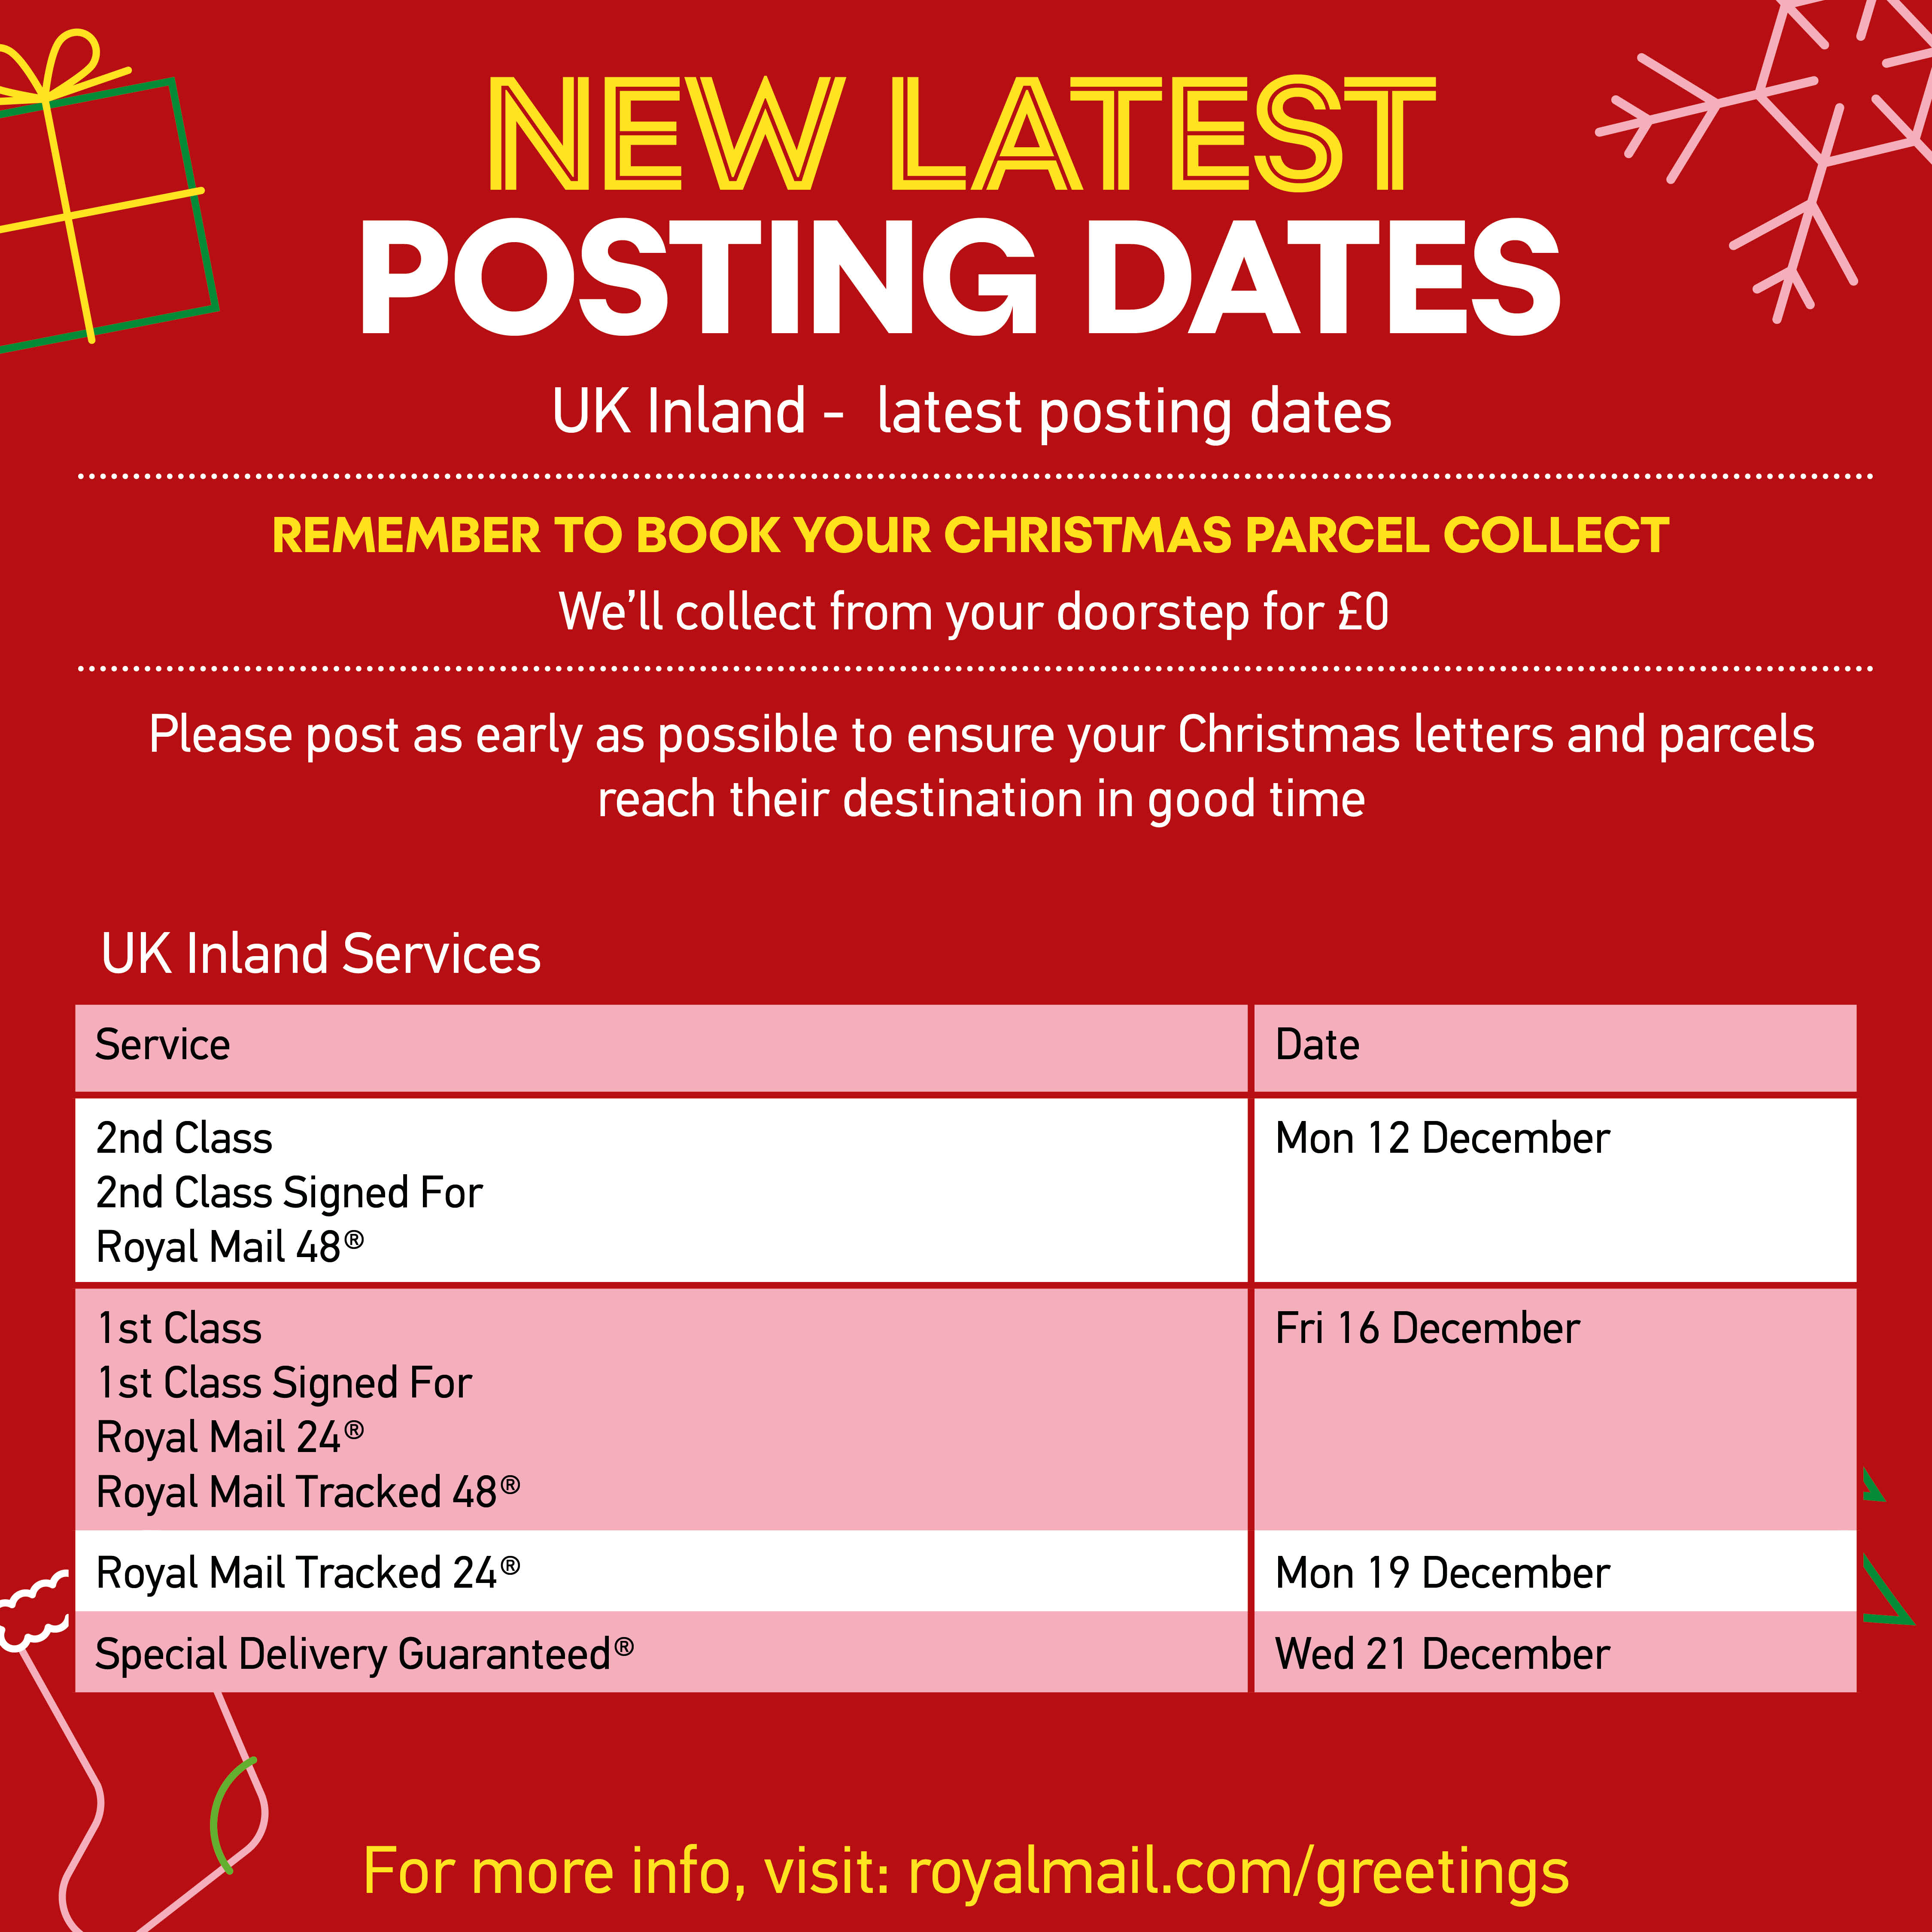 Last posting dates brought forward PG Buzz